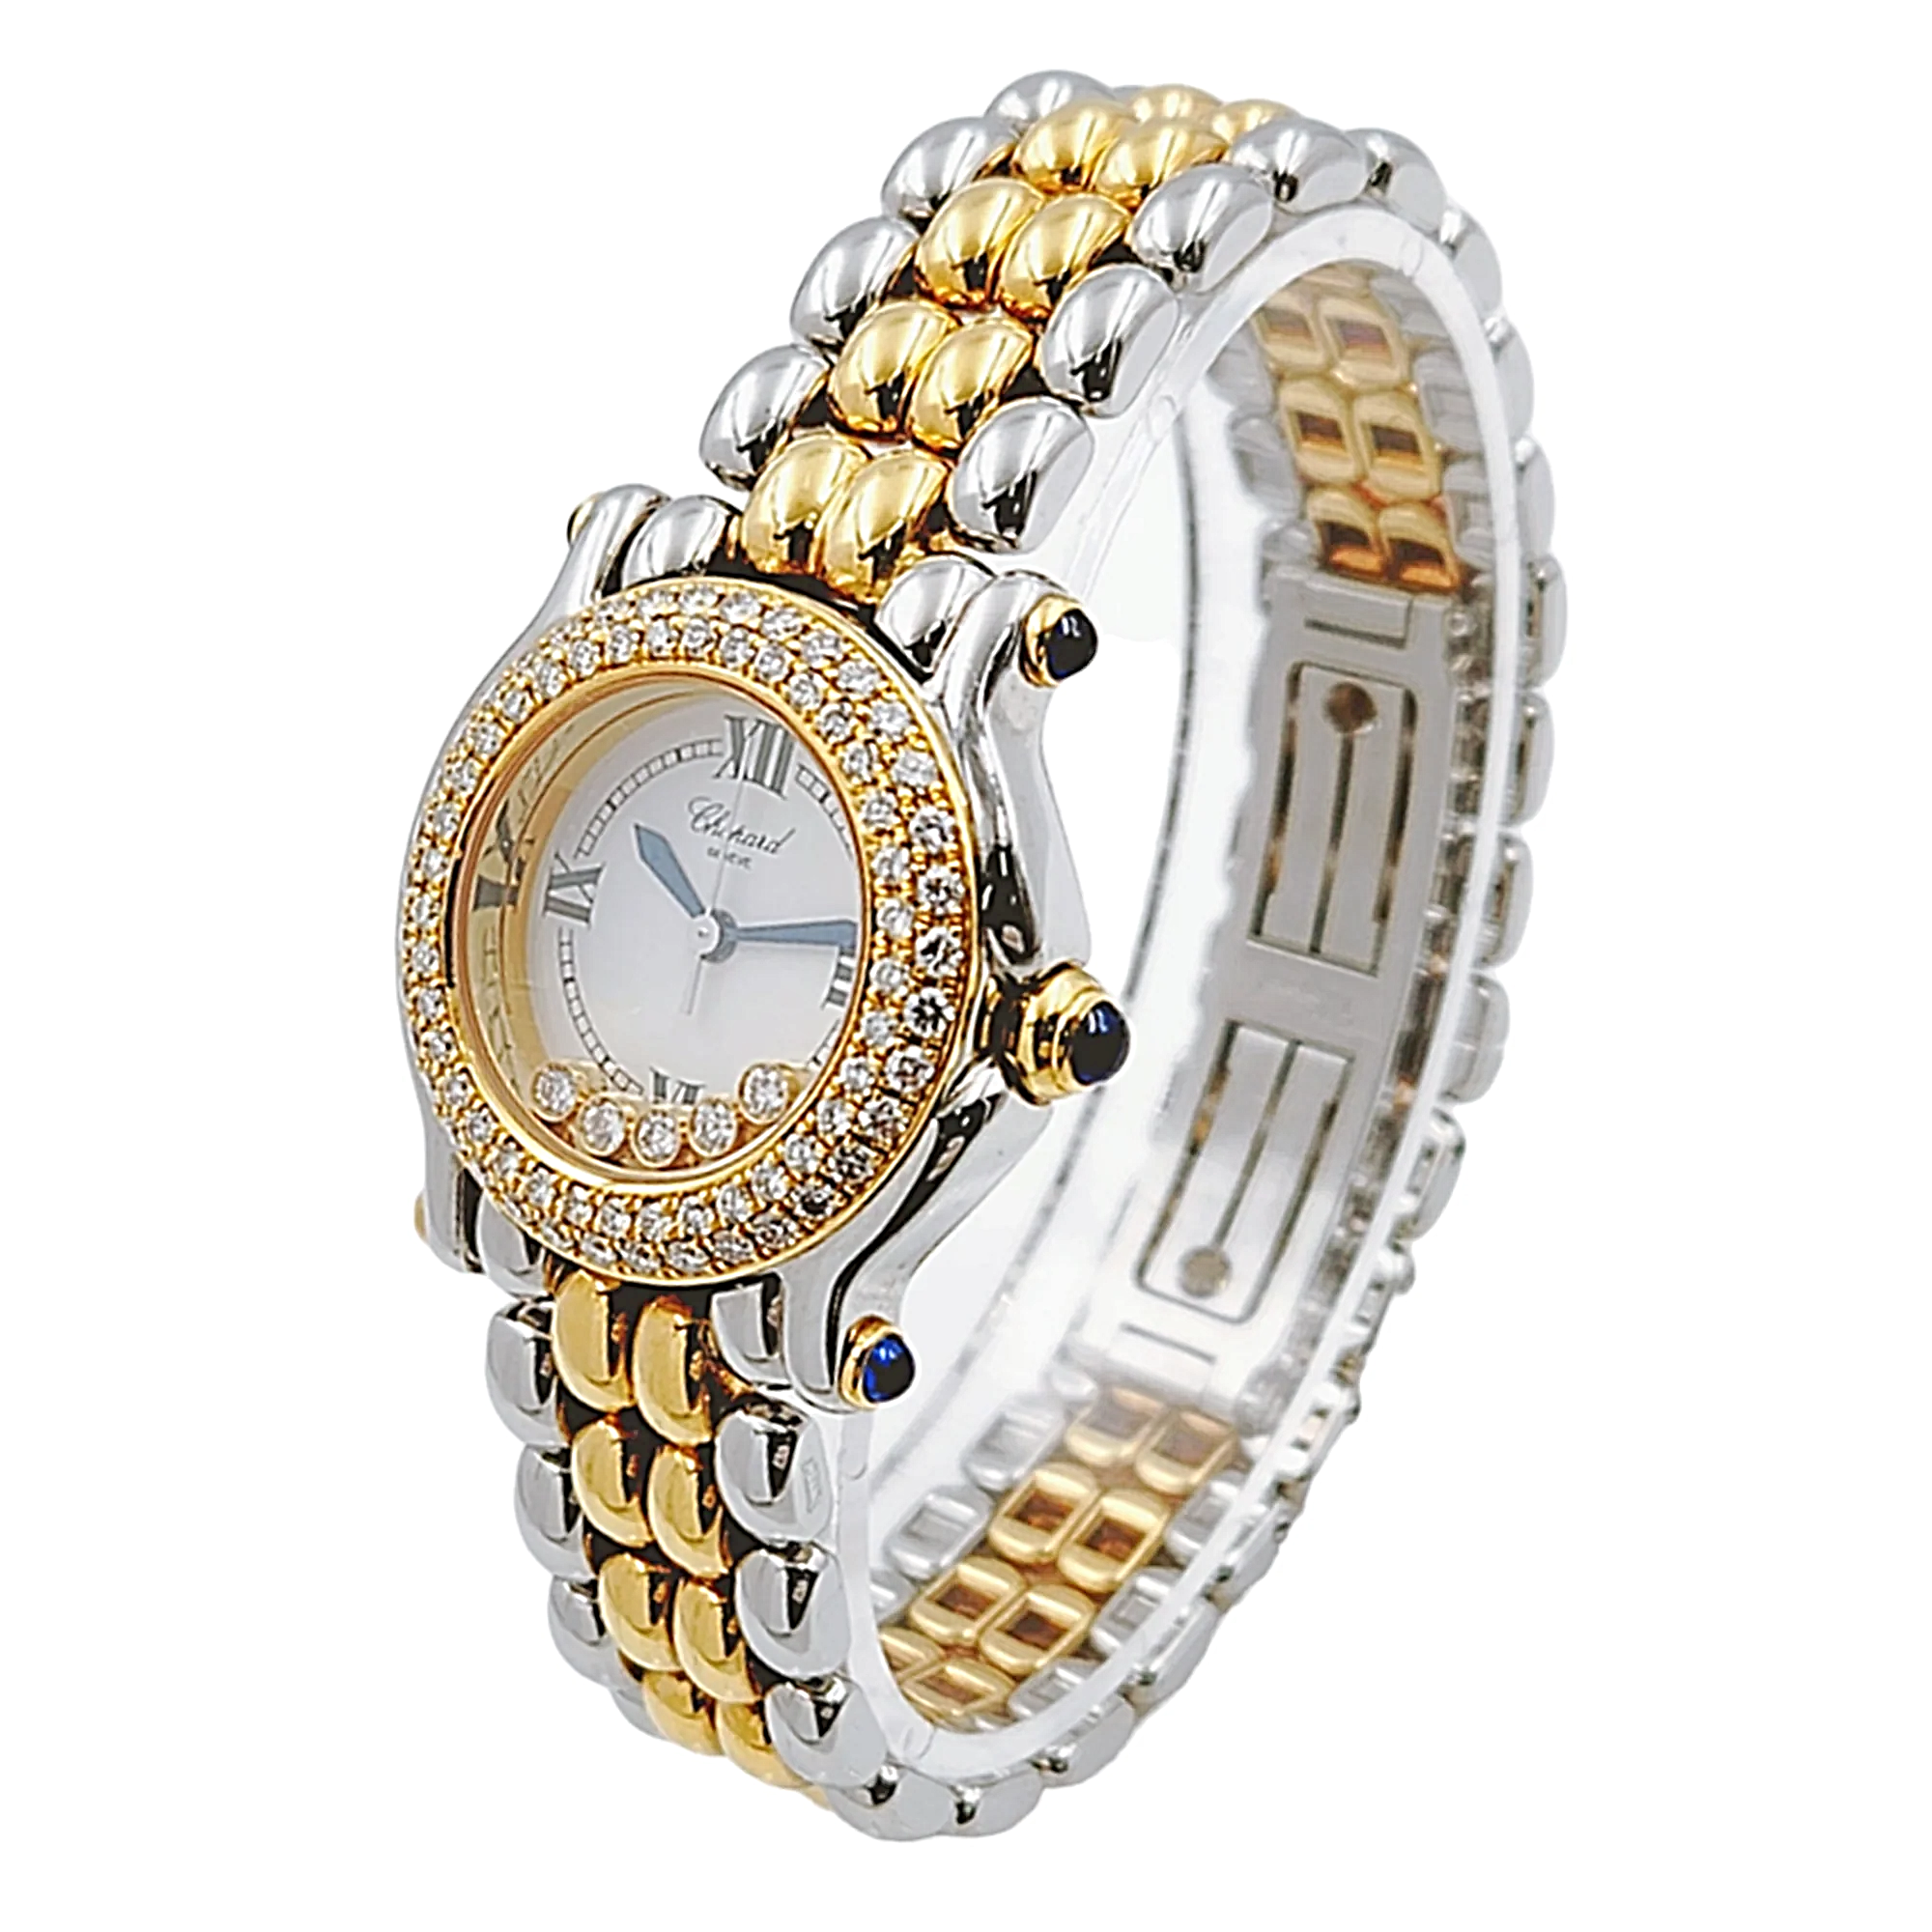 *Ladies Chopard 26mm Happy Sport Five Diamond 18K Yellow Gold / Stainless Steel Watch with White Dial and Diamond Bezel. (Pre-Owned 27/8251-23)